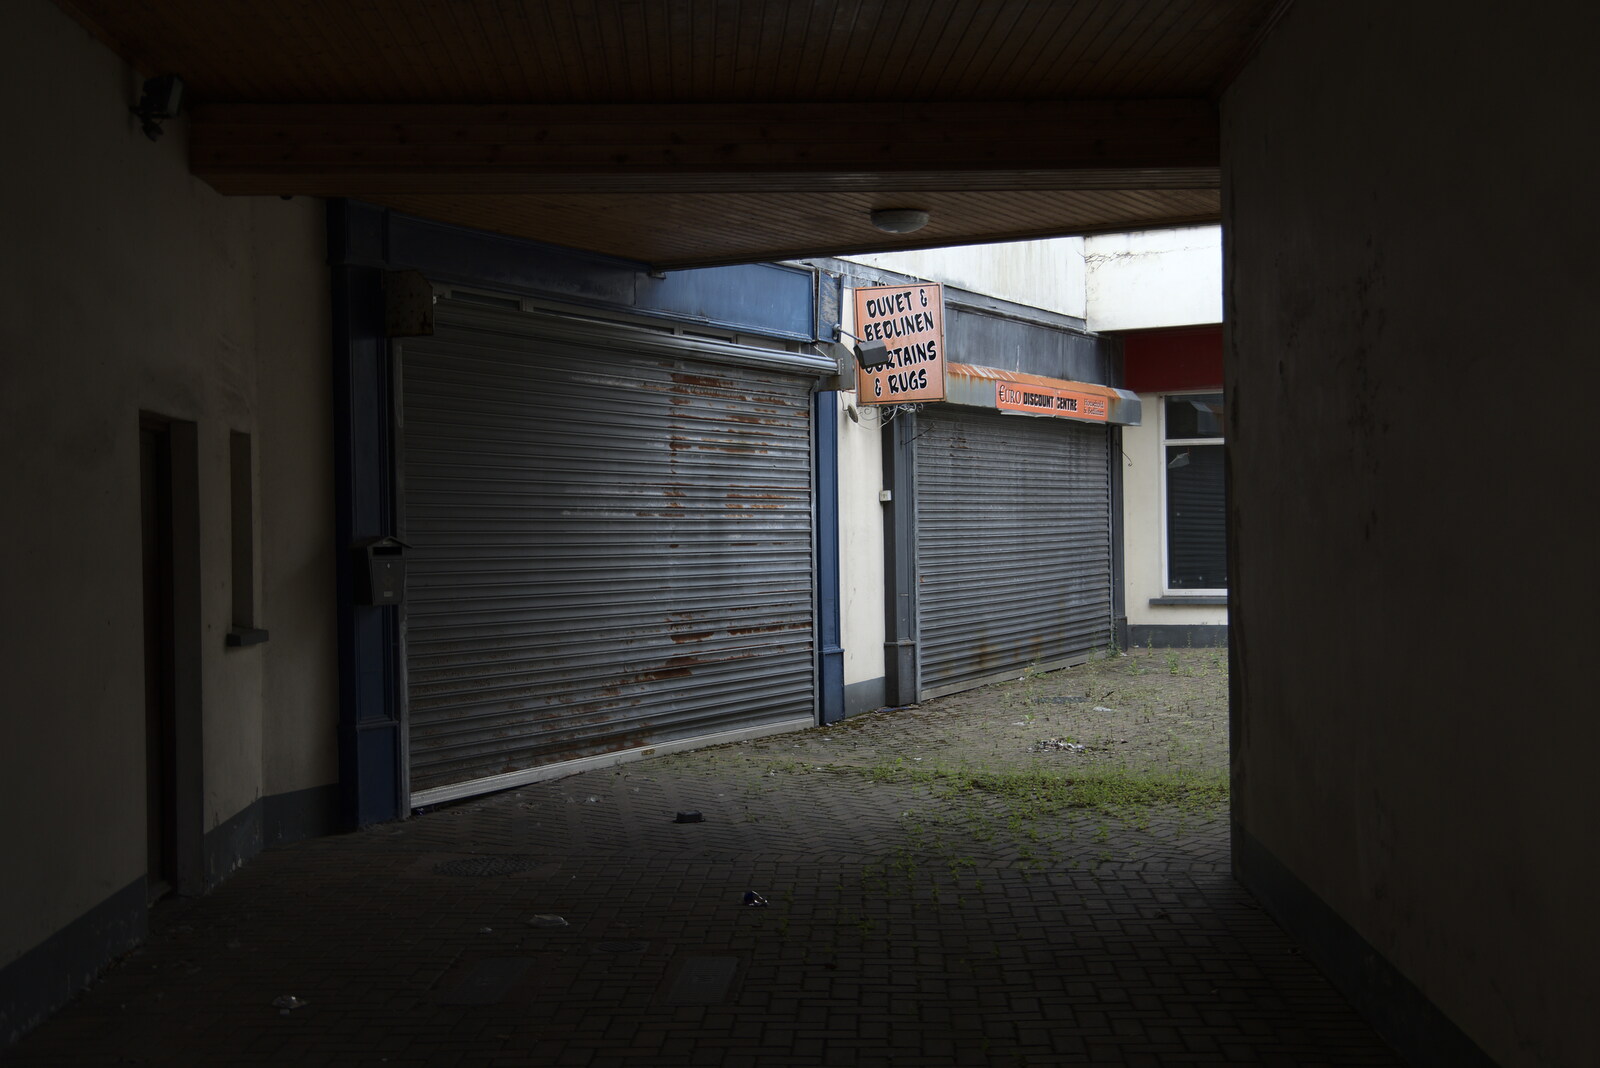 A Trip to Manorhamilton, County Leitrim, Ireland - 11th August 2021: Permanent shutters on a bedding shop